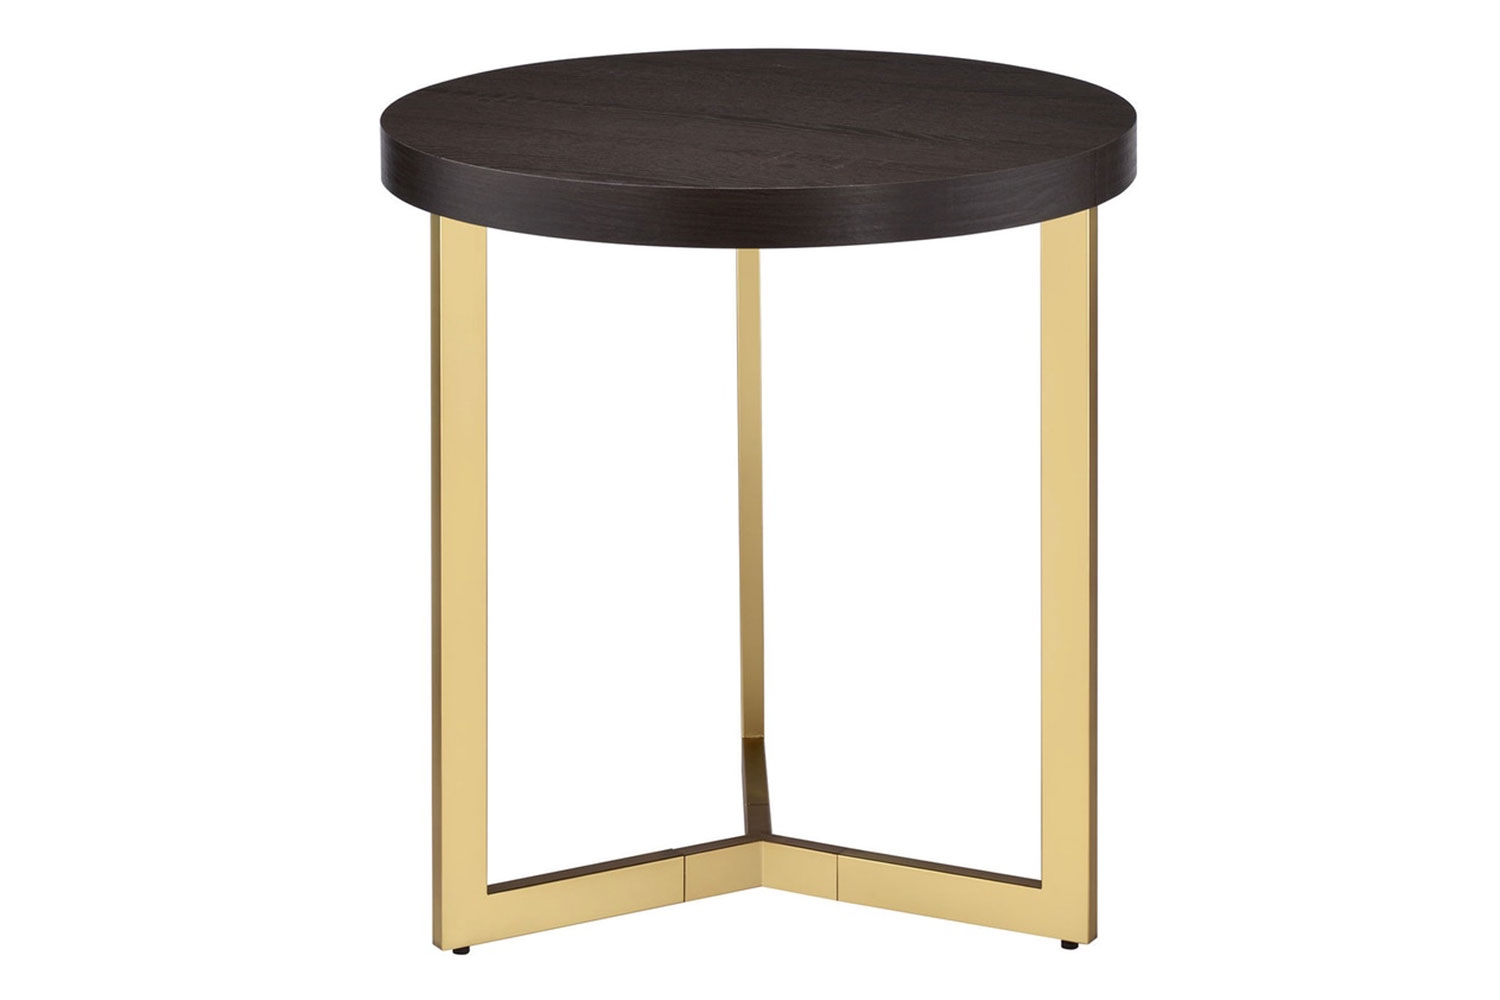 Harper end table in espresso with gold base.